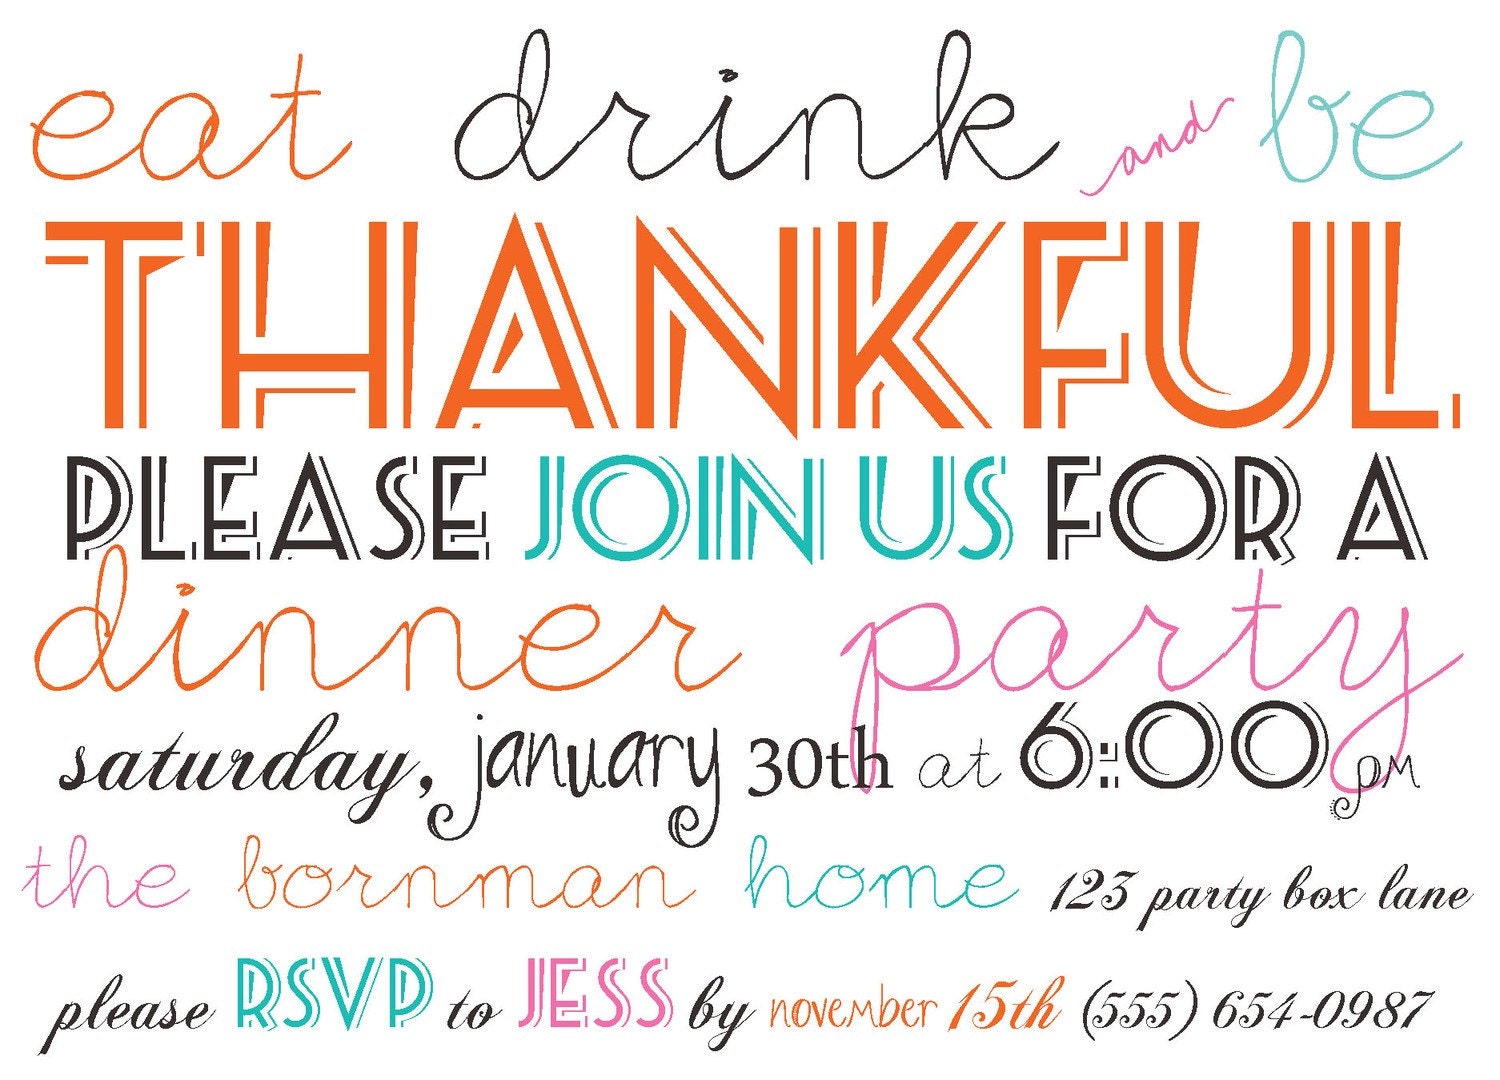 Items similar to Dinner Party Invitation (20 printed invites) on Etsy